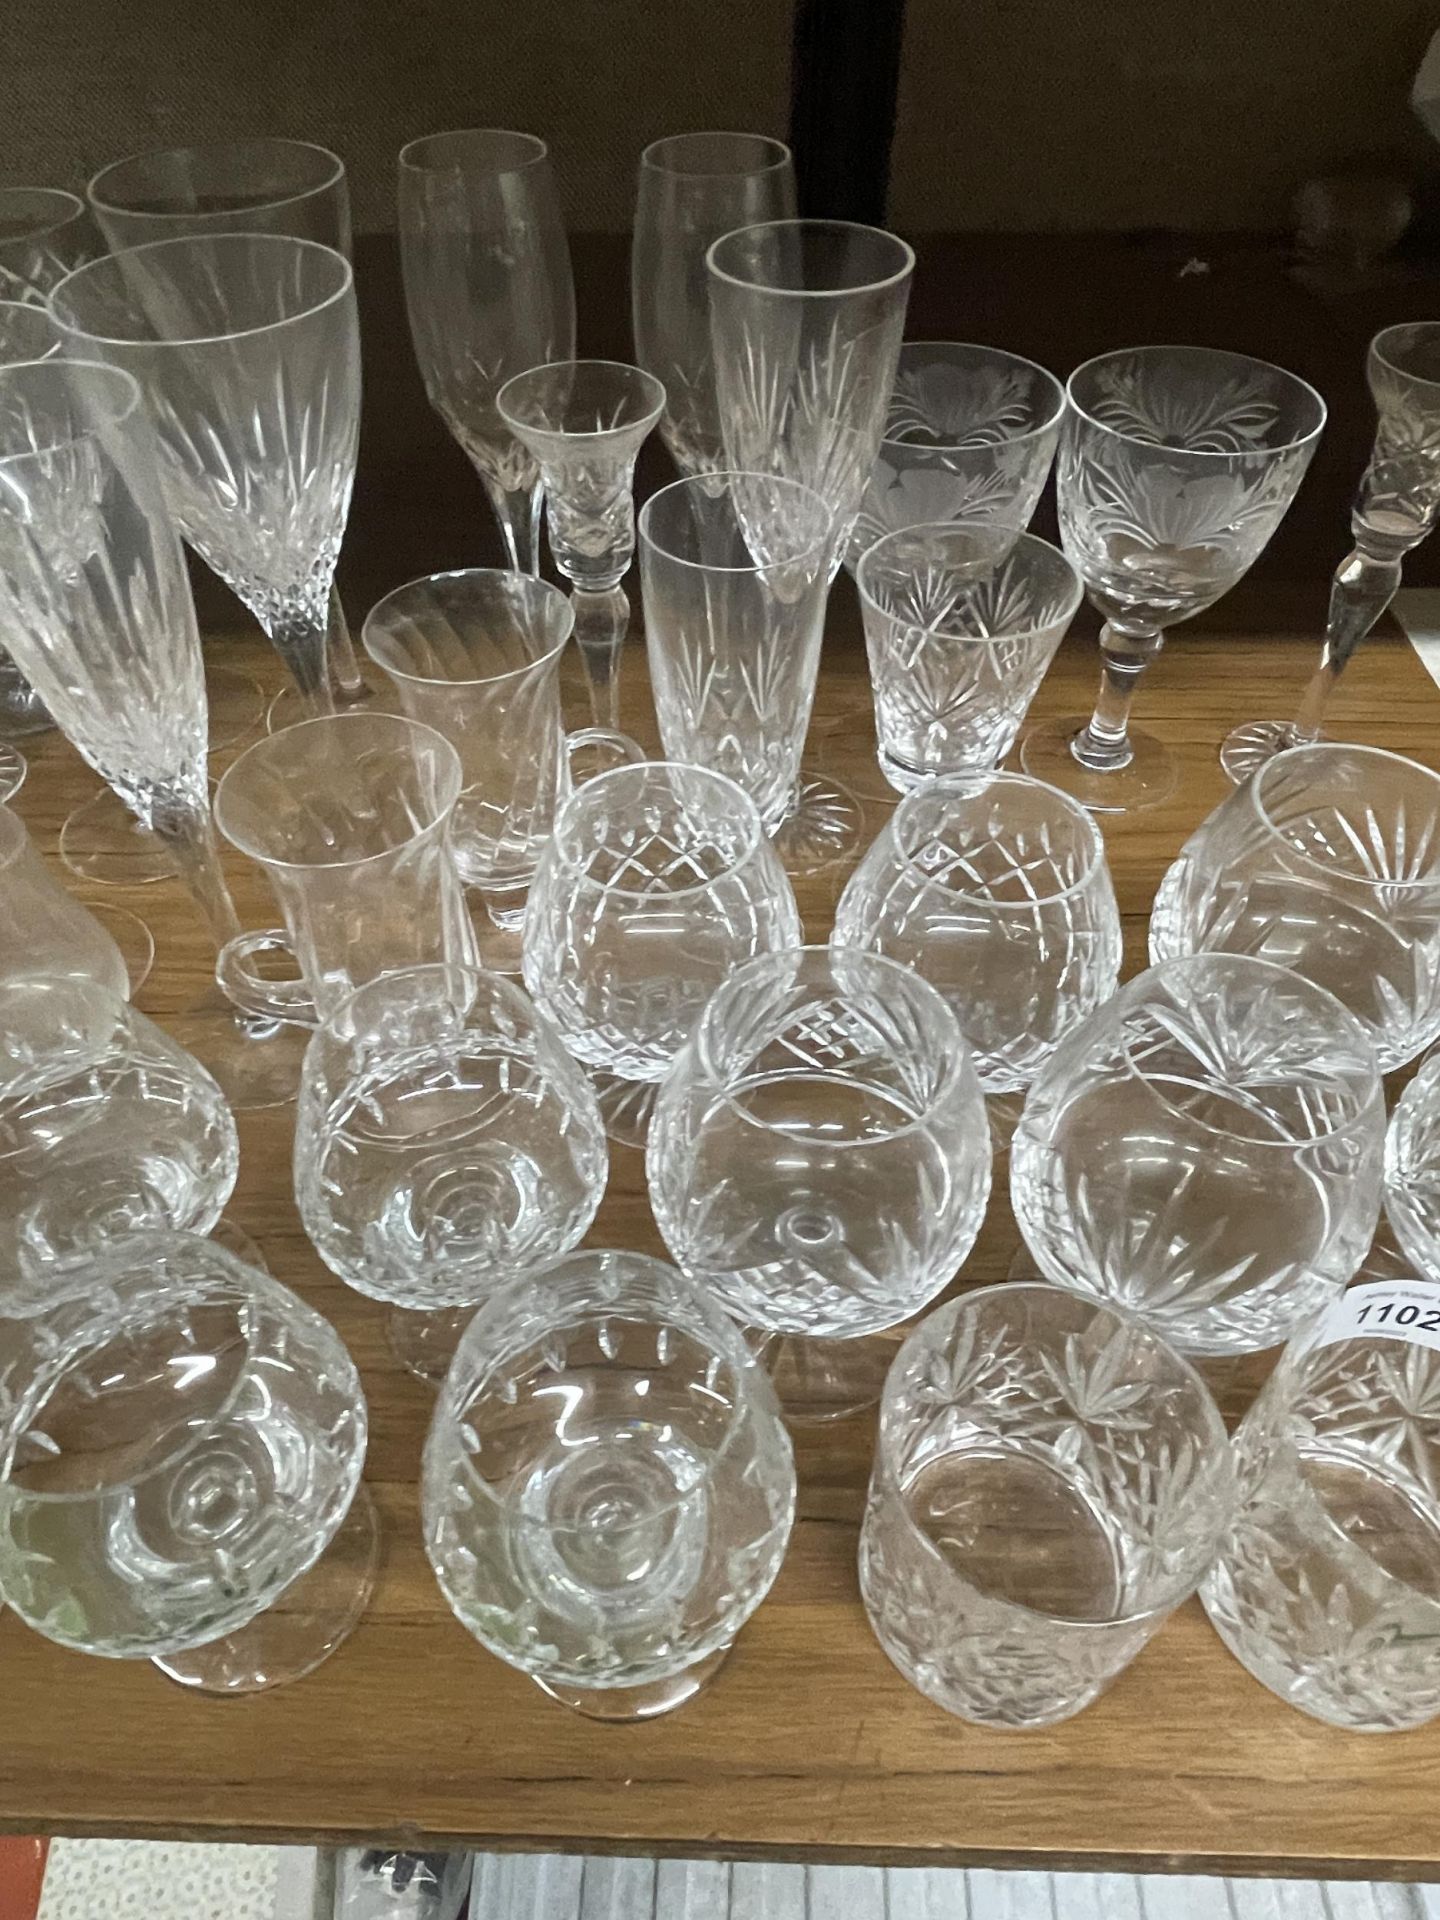 A LARGE COLLECTION OF CUT AND FURTHER GLASS DRINKING GLASSES - Image 4 of 5